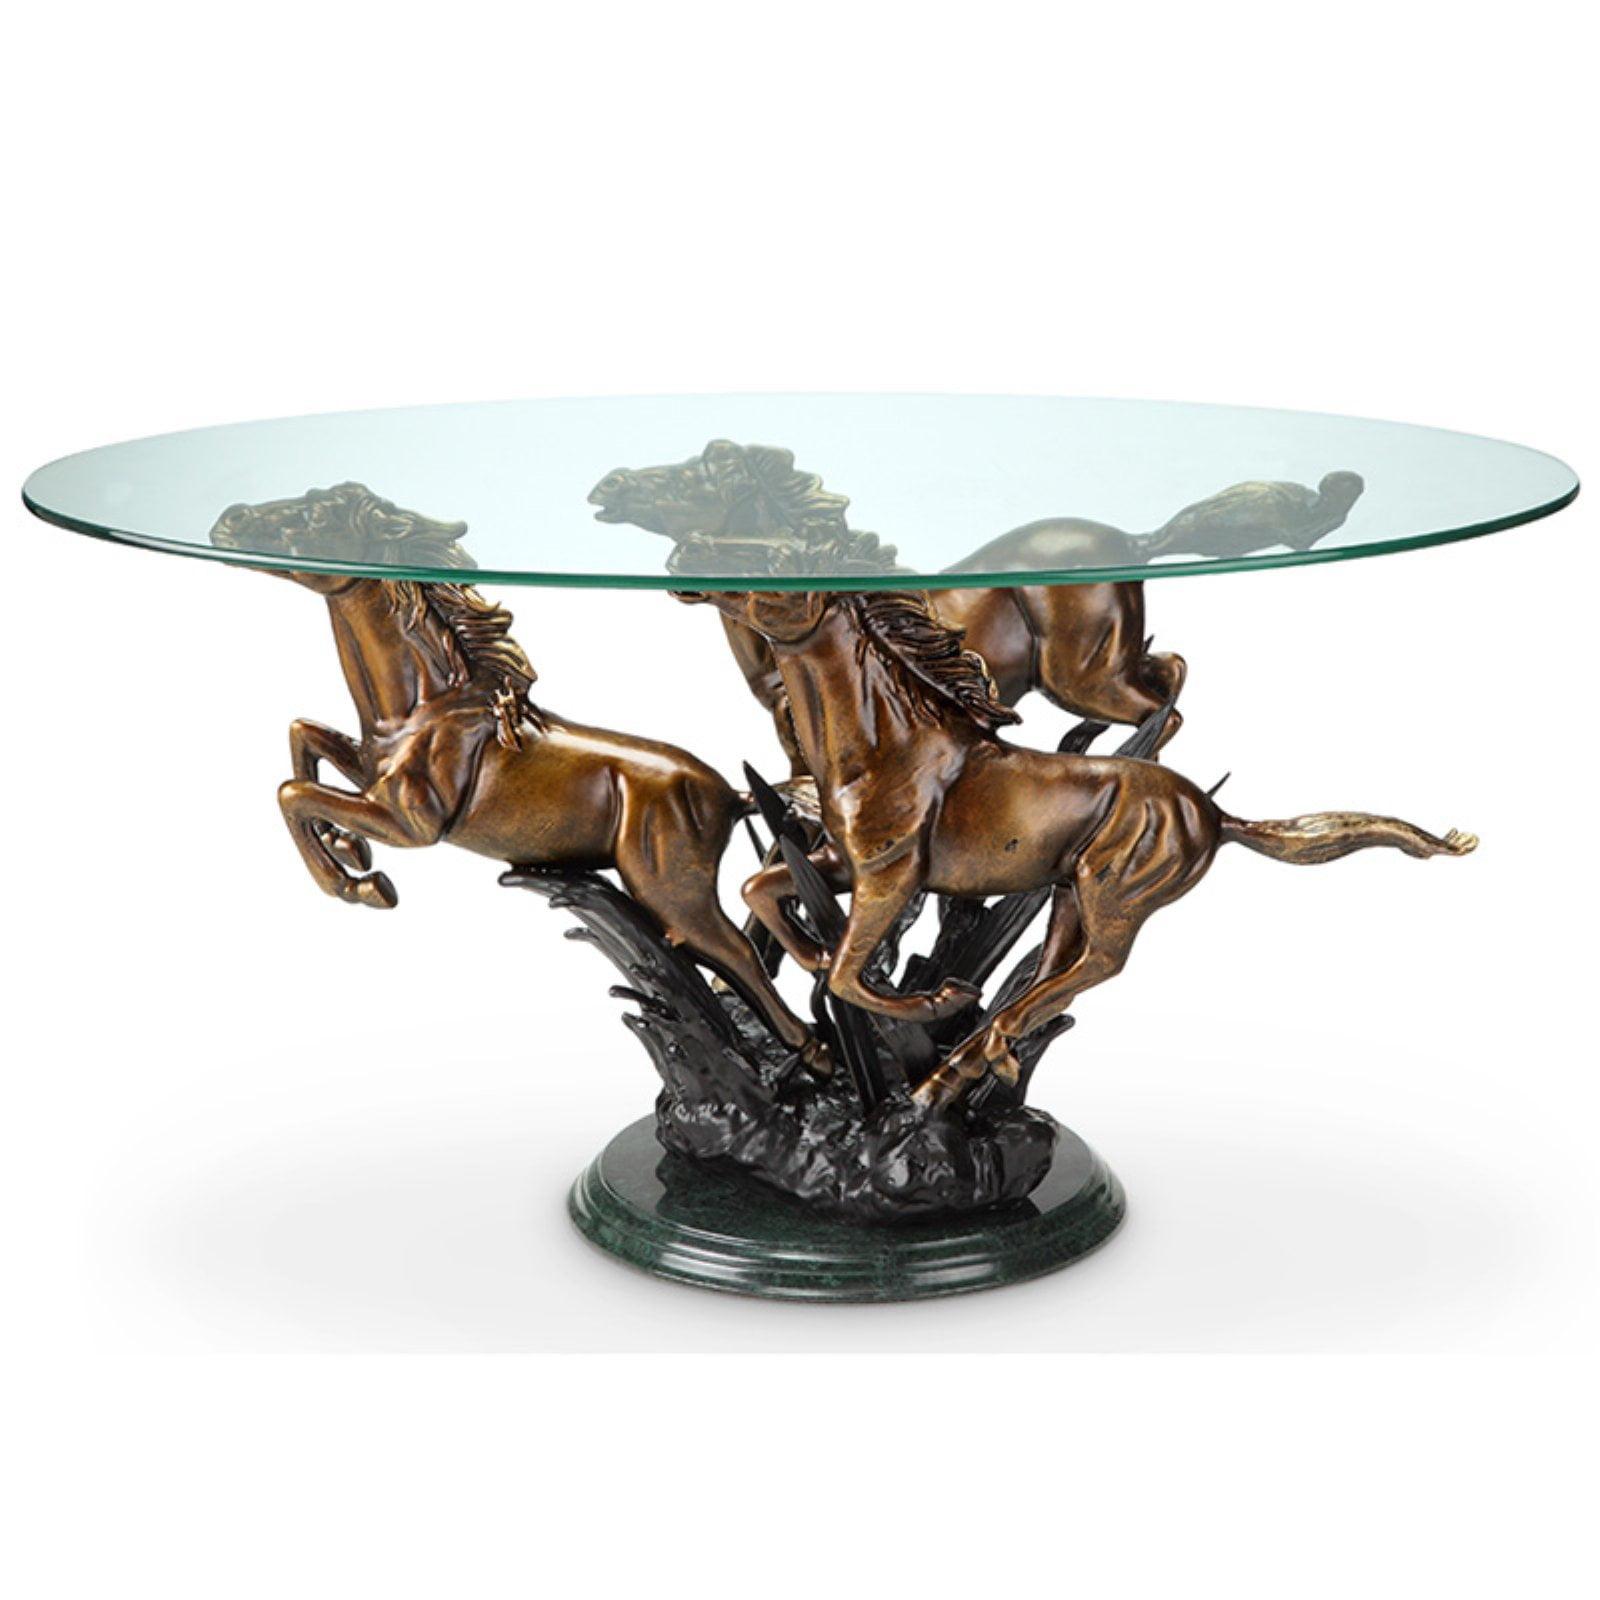 Equestrian Elegance Oval Glass & Marble Coffee Table with Metal Horses